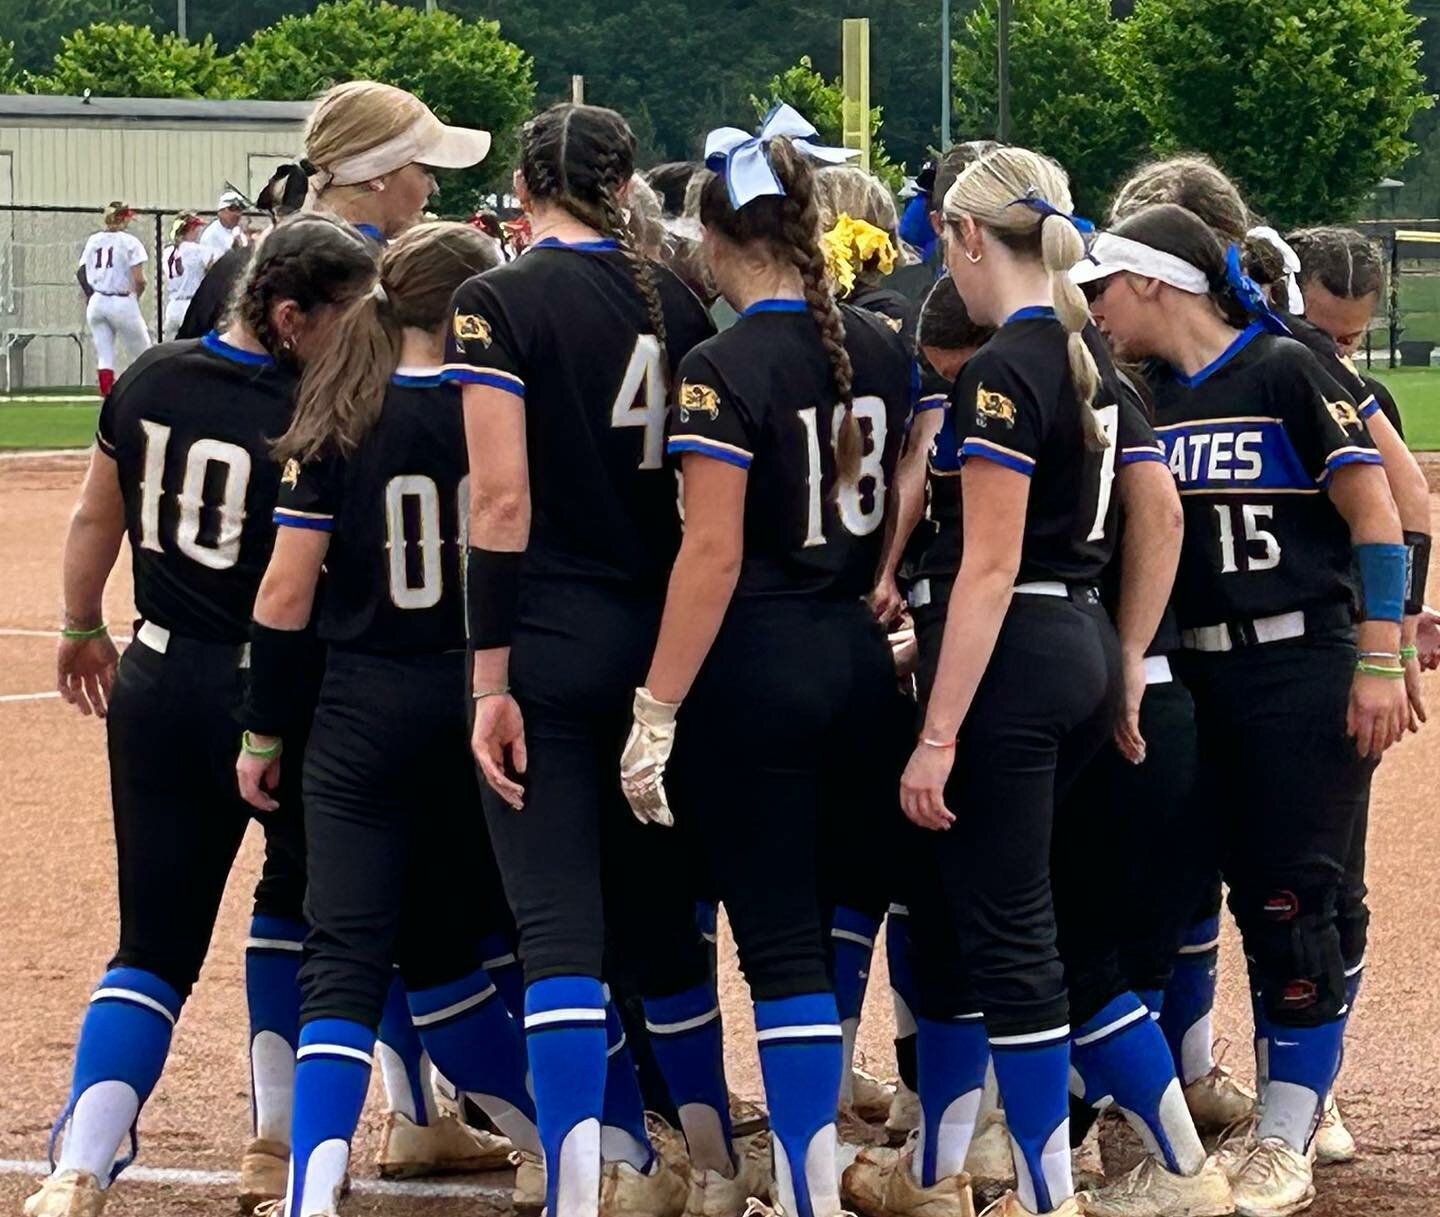 Before Fairhope’s second-round game against the Sparkman Senators in the AHSAA state championship tournament Friday, May 19, the Pirates surrounded first base as a team as they have done all season.